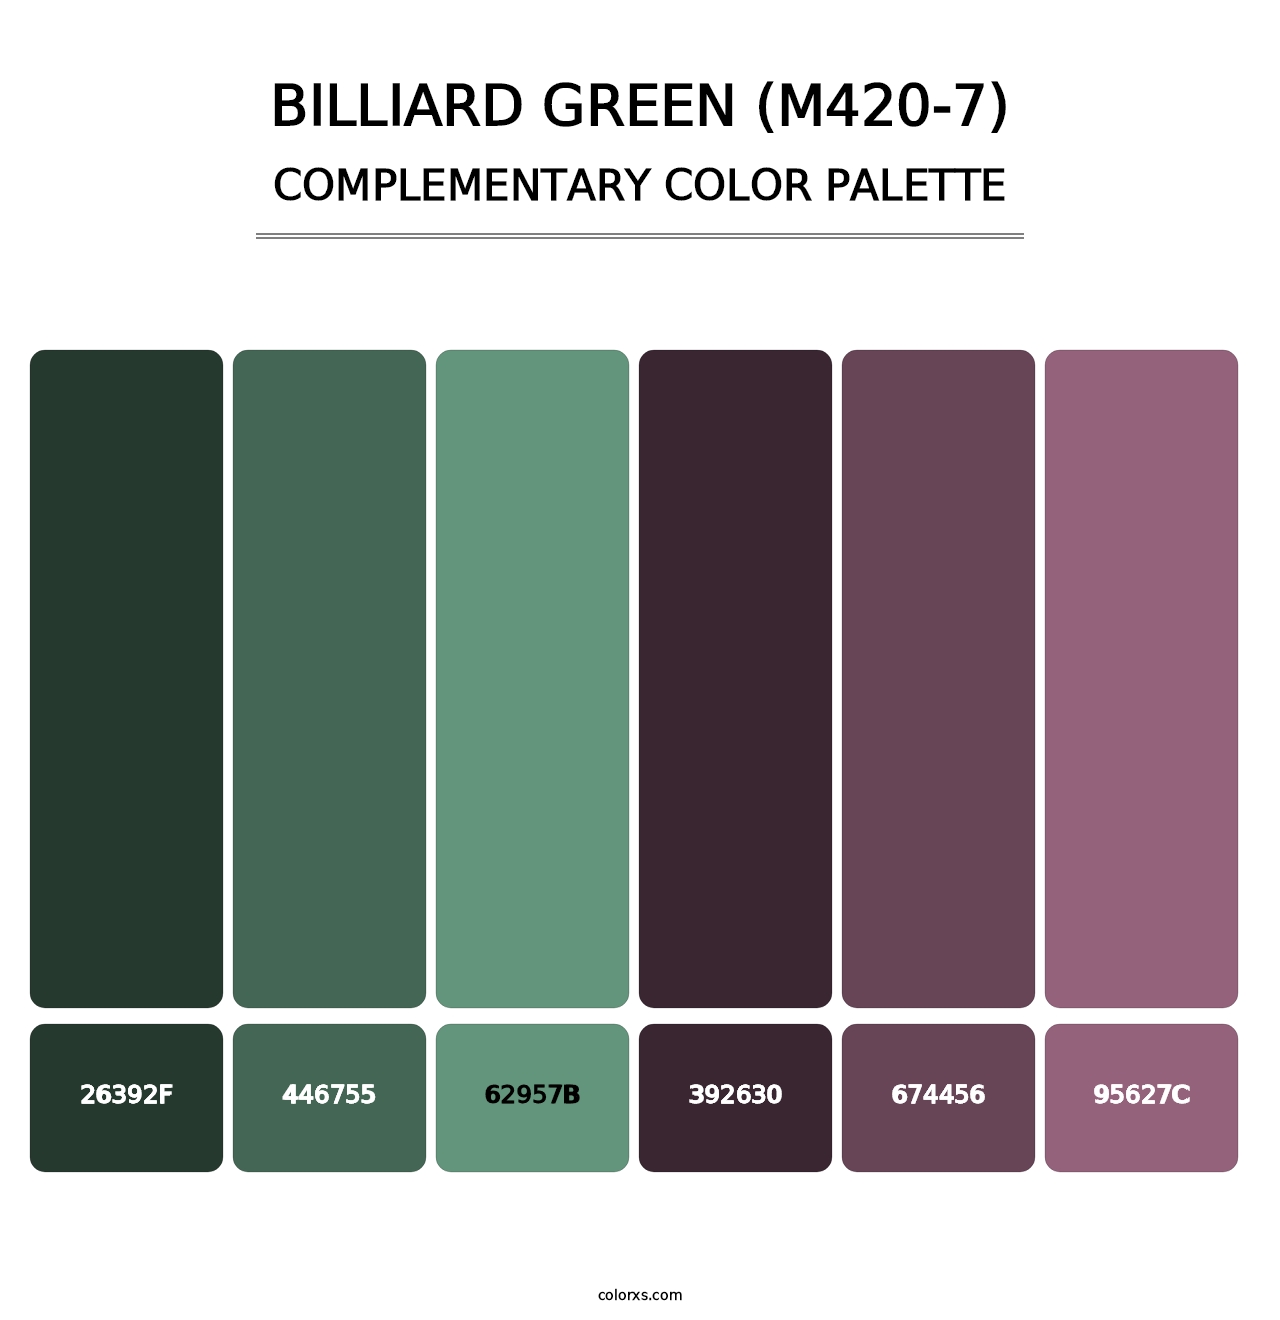 Billiard Green (M420-7) - Complementary Color Palette